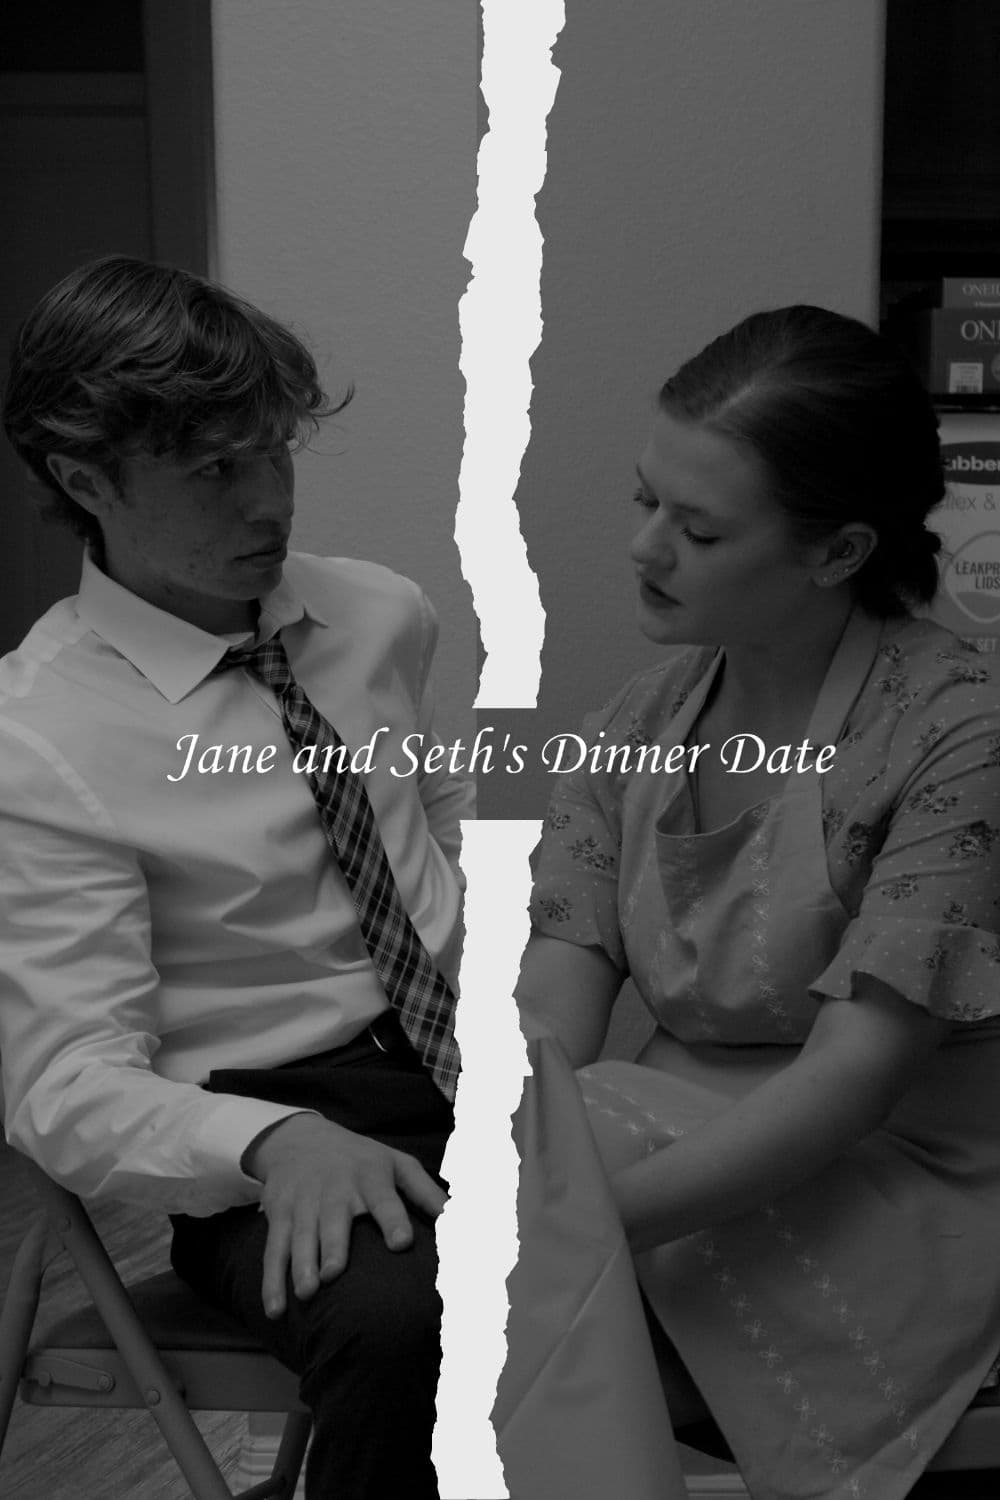 Jane and Seth's Dinner Date